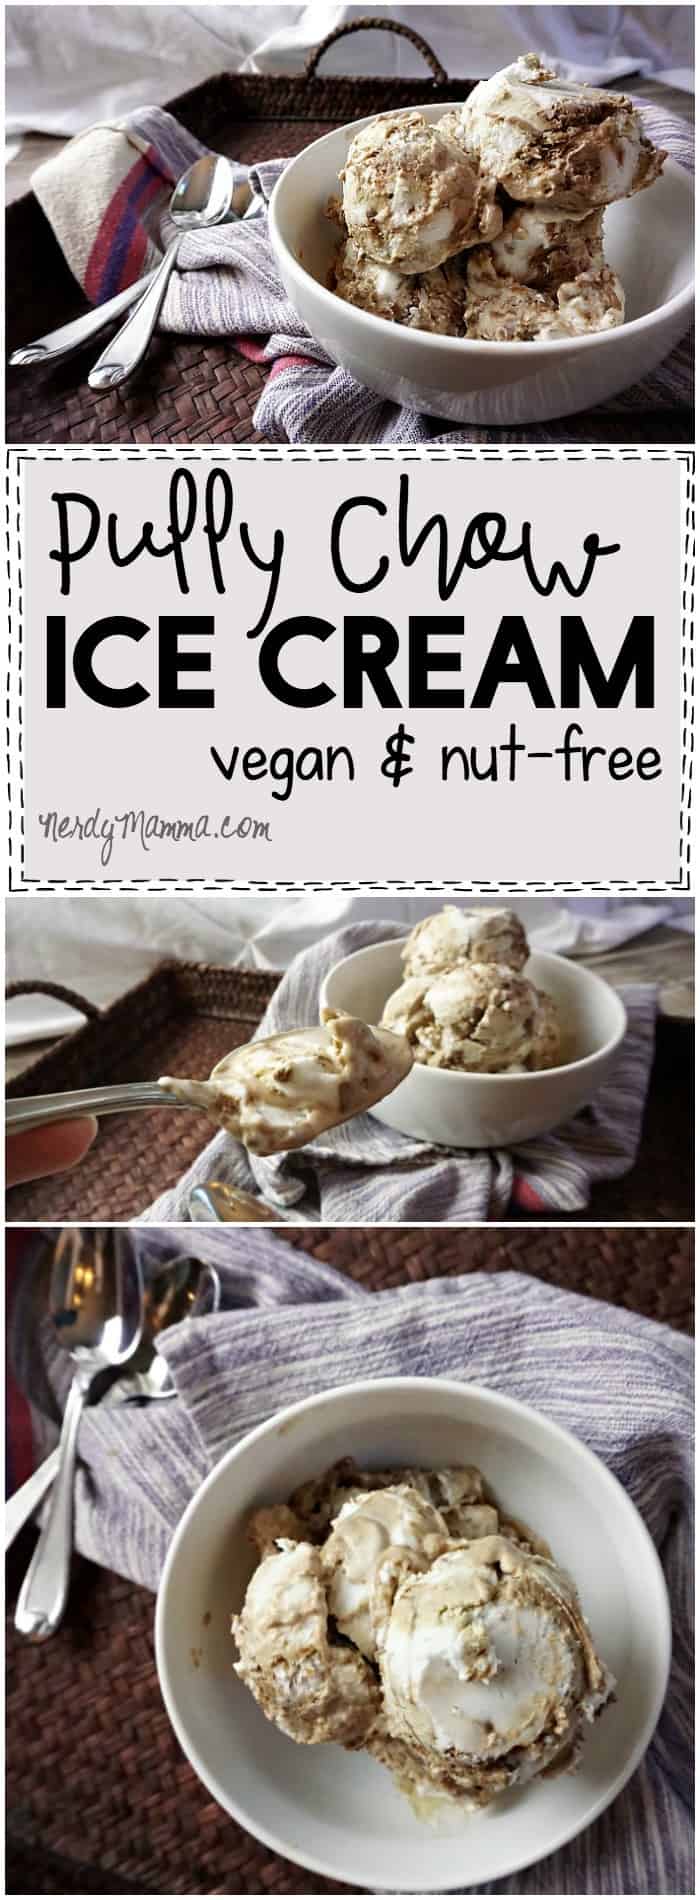 I love how easy this dairy-free ice cream recipe is--and it's flavored like Puppy Chow! SO. AWESOME.